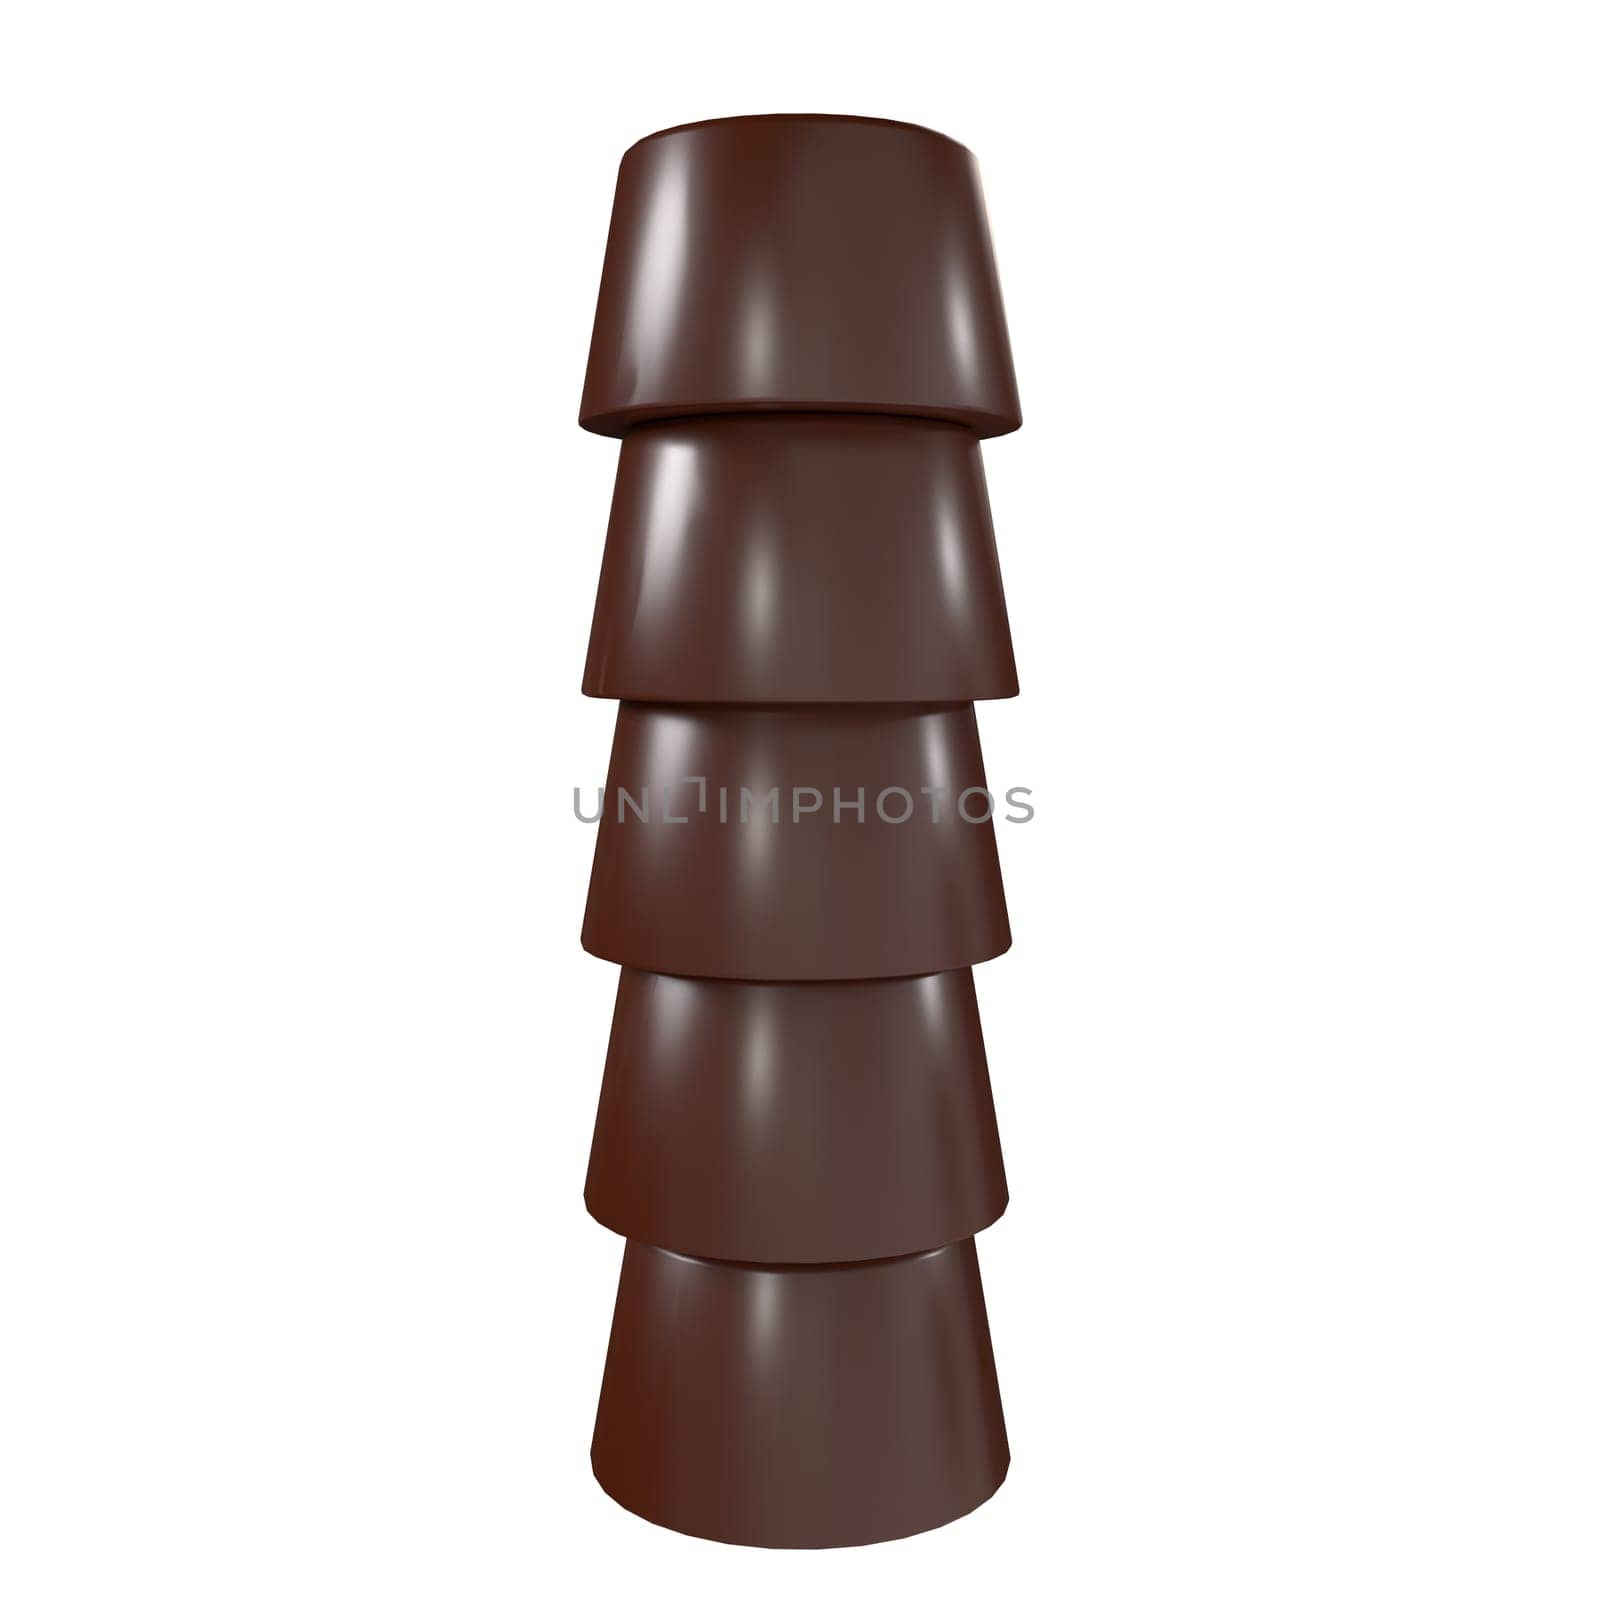 Chocolate isolated on white background. High quality 3d illustration